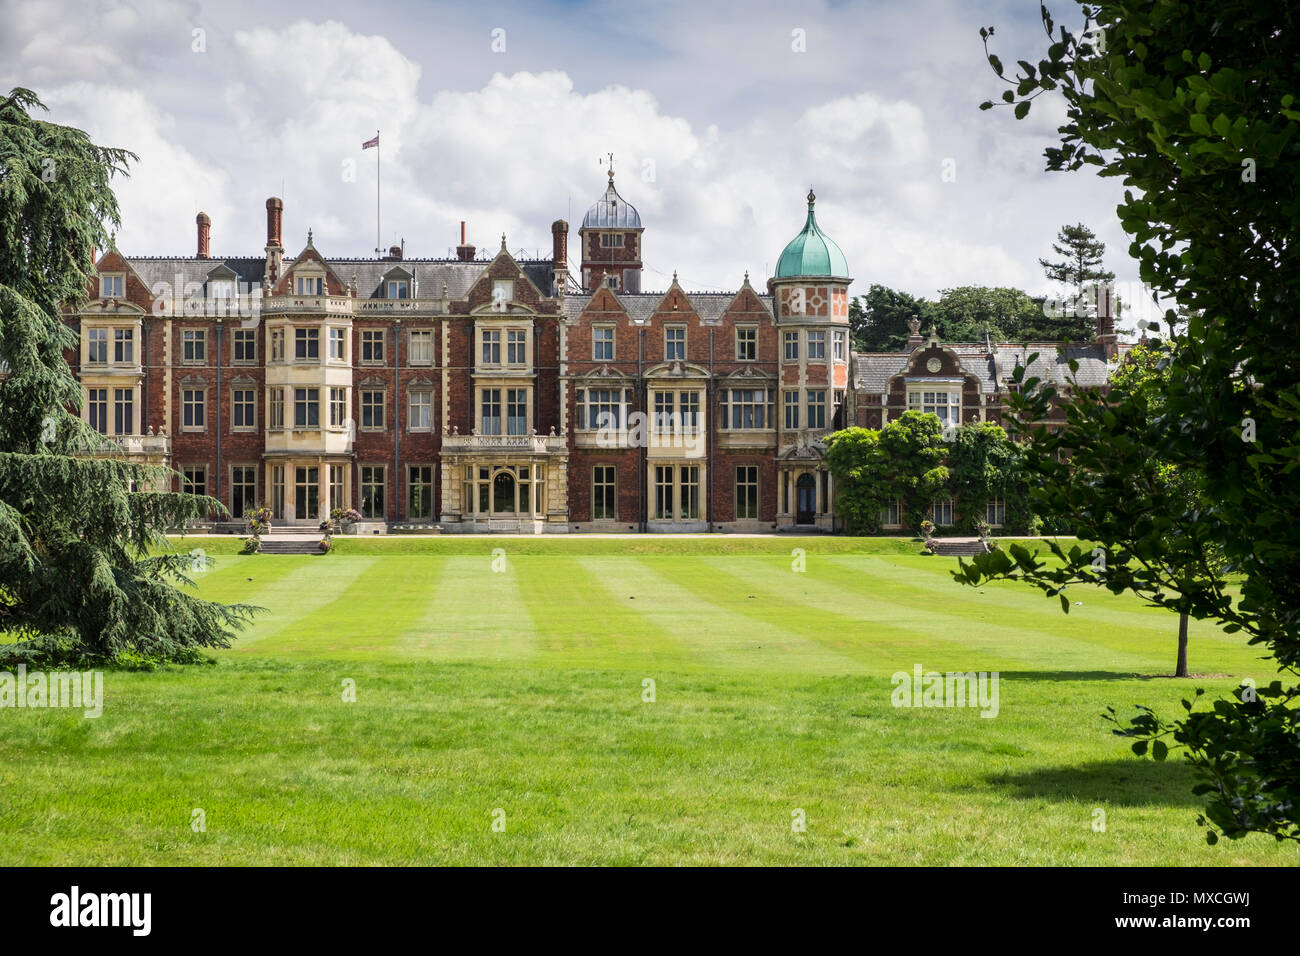 Sandringham house and west lawn, Built in 1870 a classic Victorian architecture, Norfolk, England, UK Stock Photo